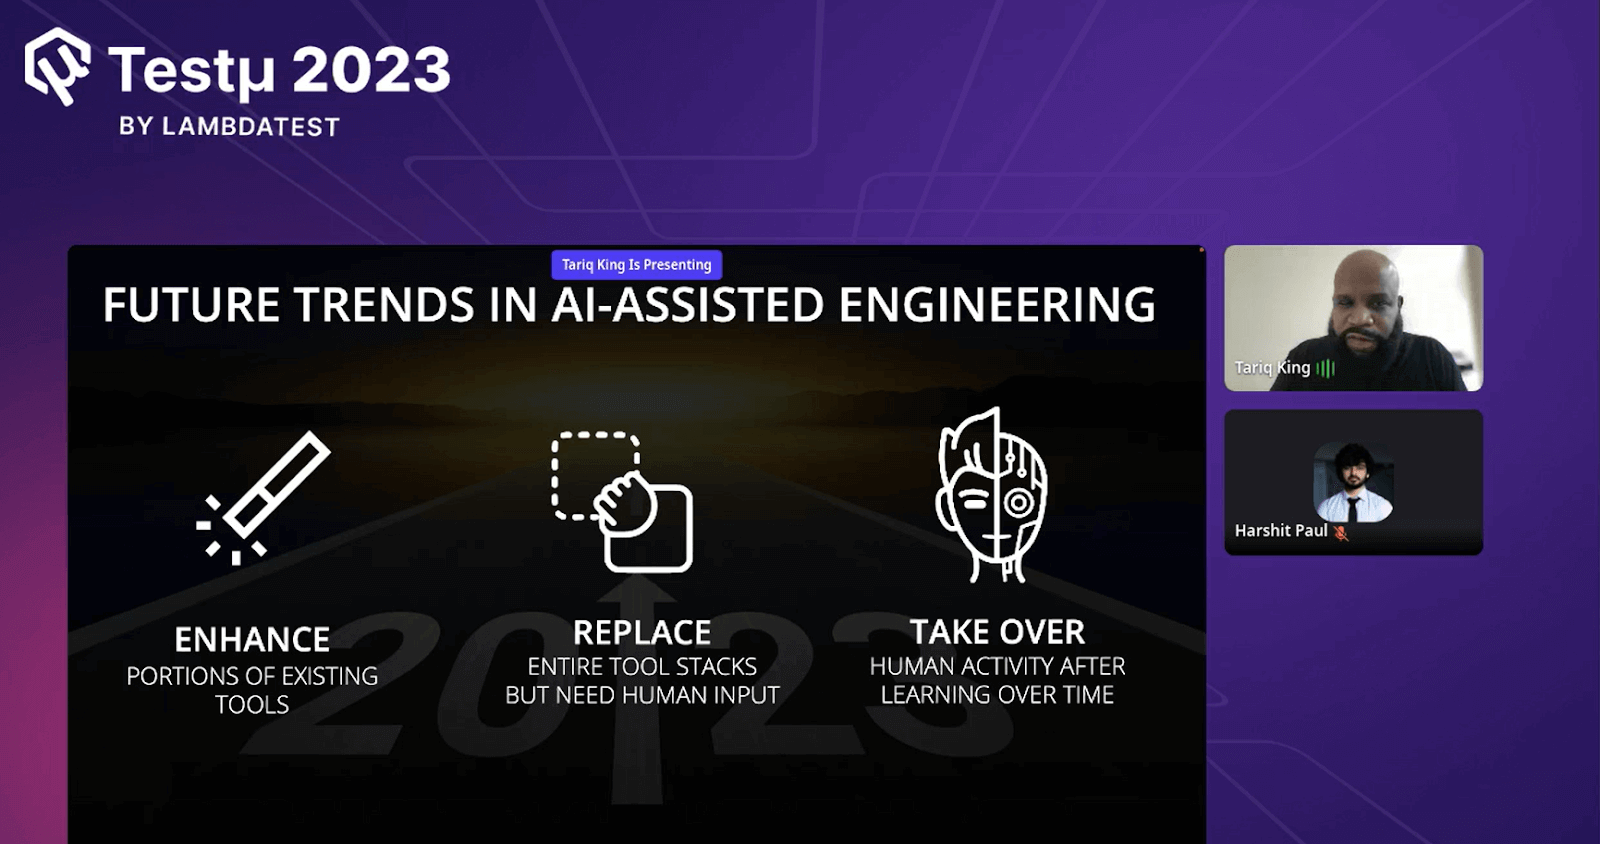 Future trends in AI-Assisted Engineering